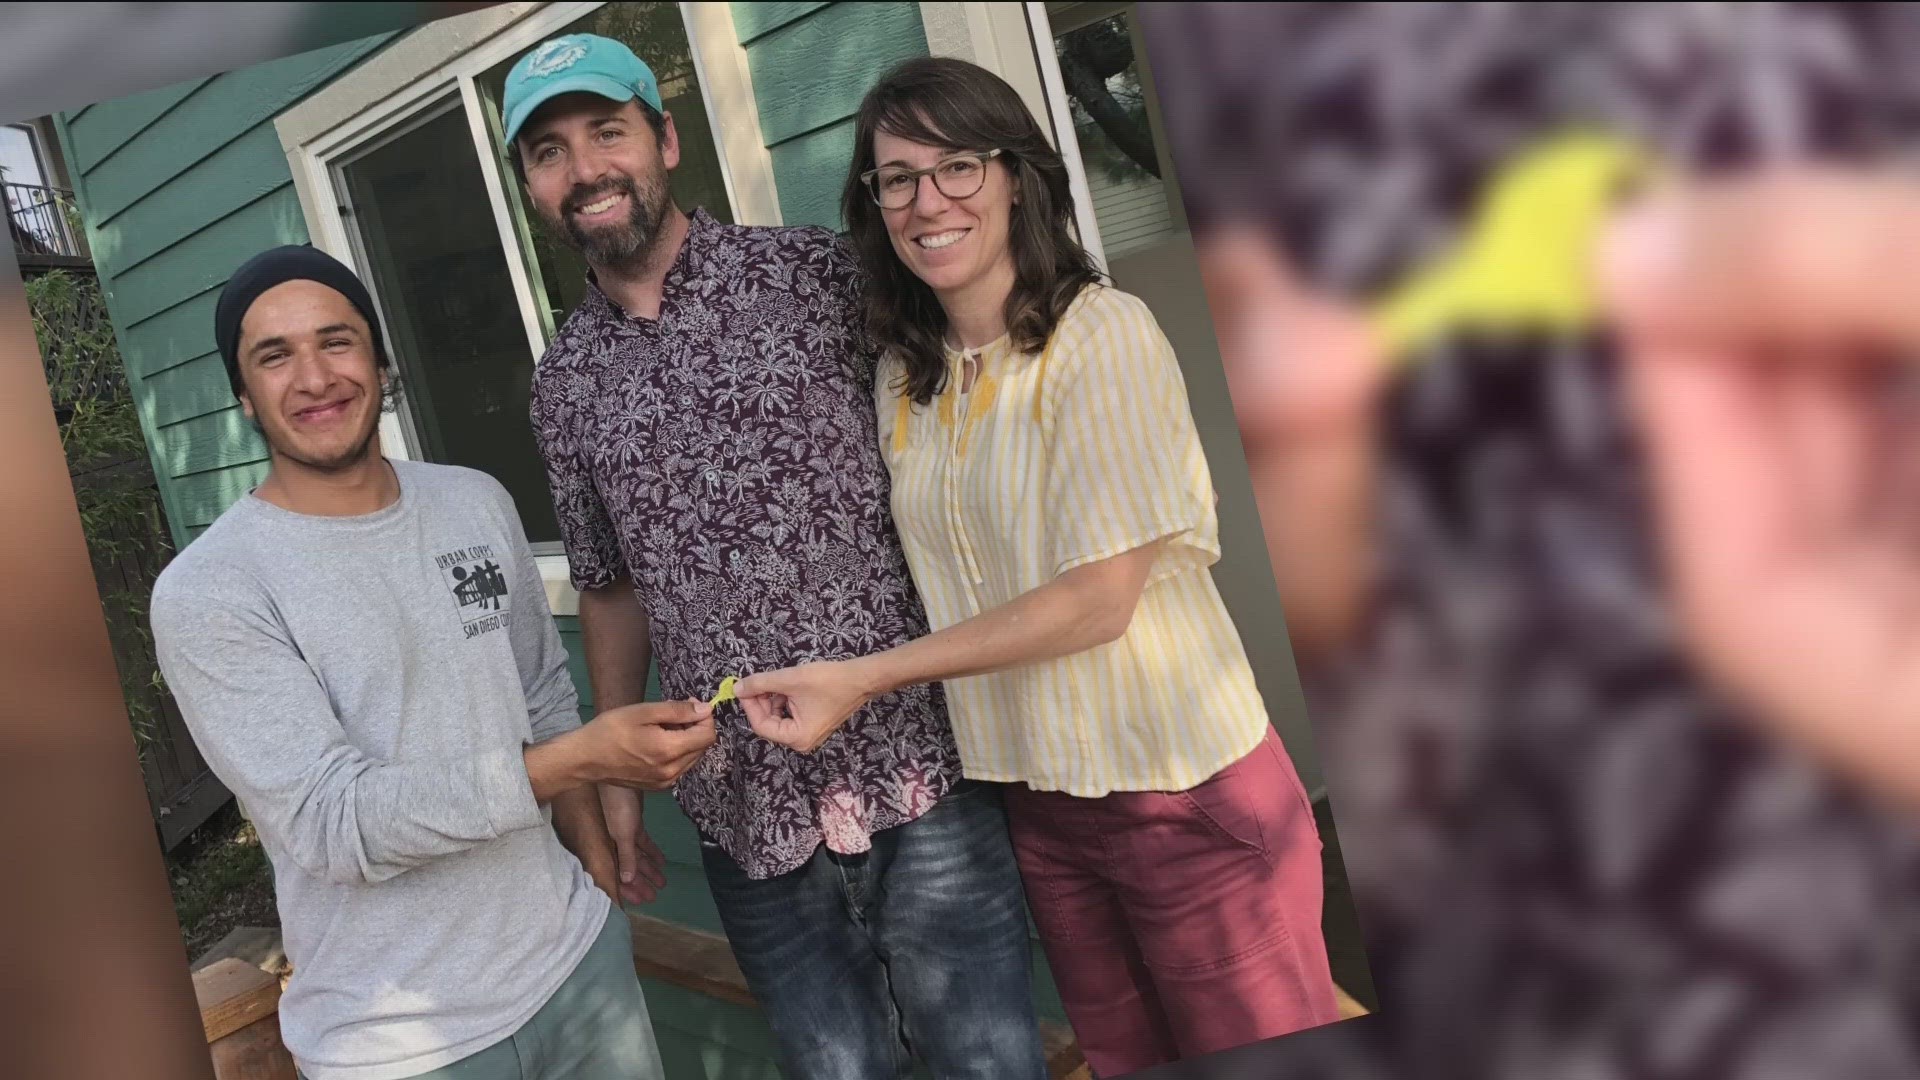 This Normal Heights couple is offering a 'Tiny Home' to an Urban Corps member for a nine month stay.